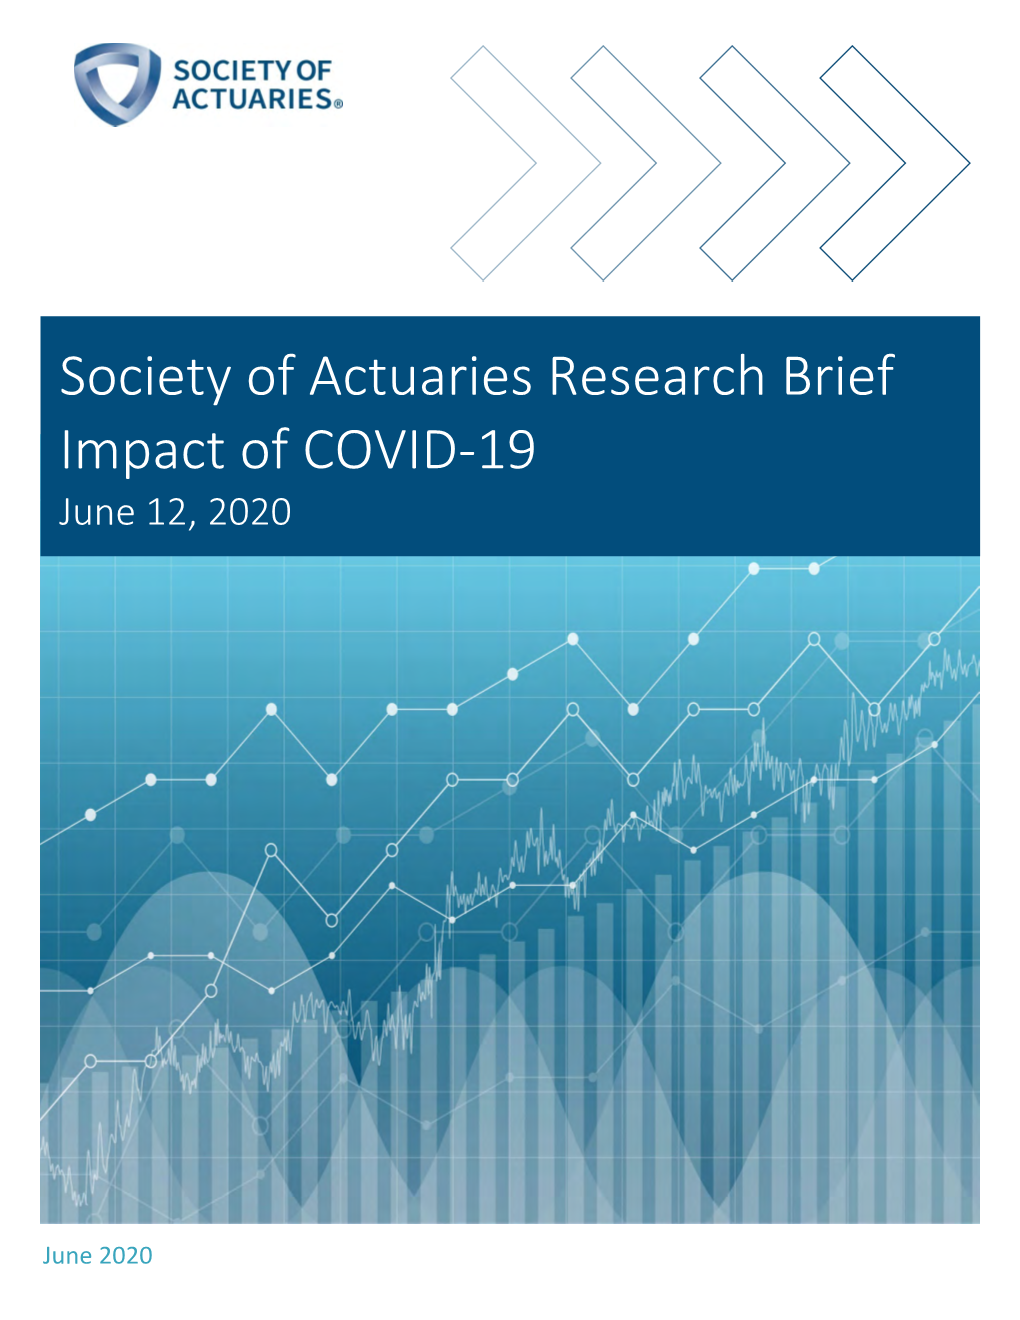 Society of Actuaries Research Brief Impact of COVID-19 June 12, 2020